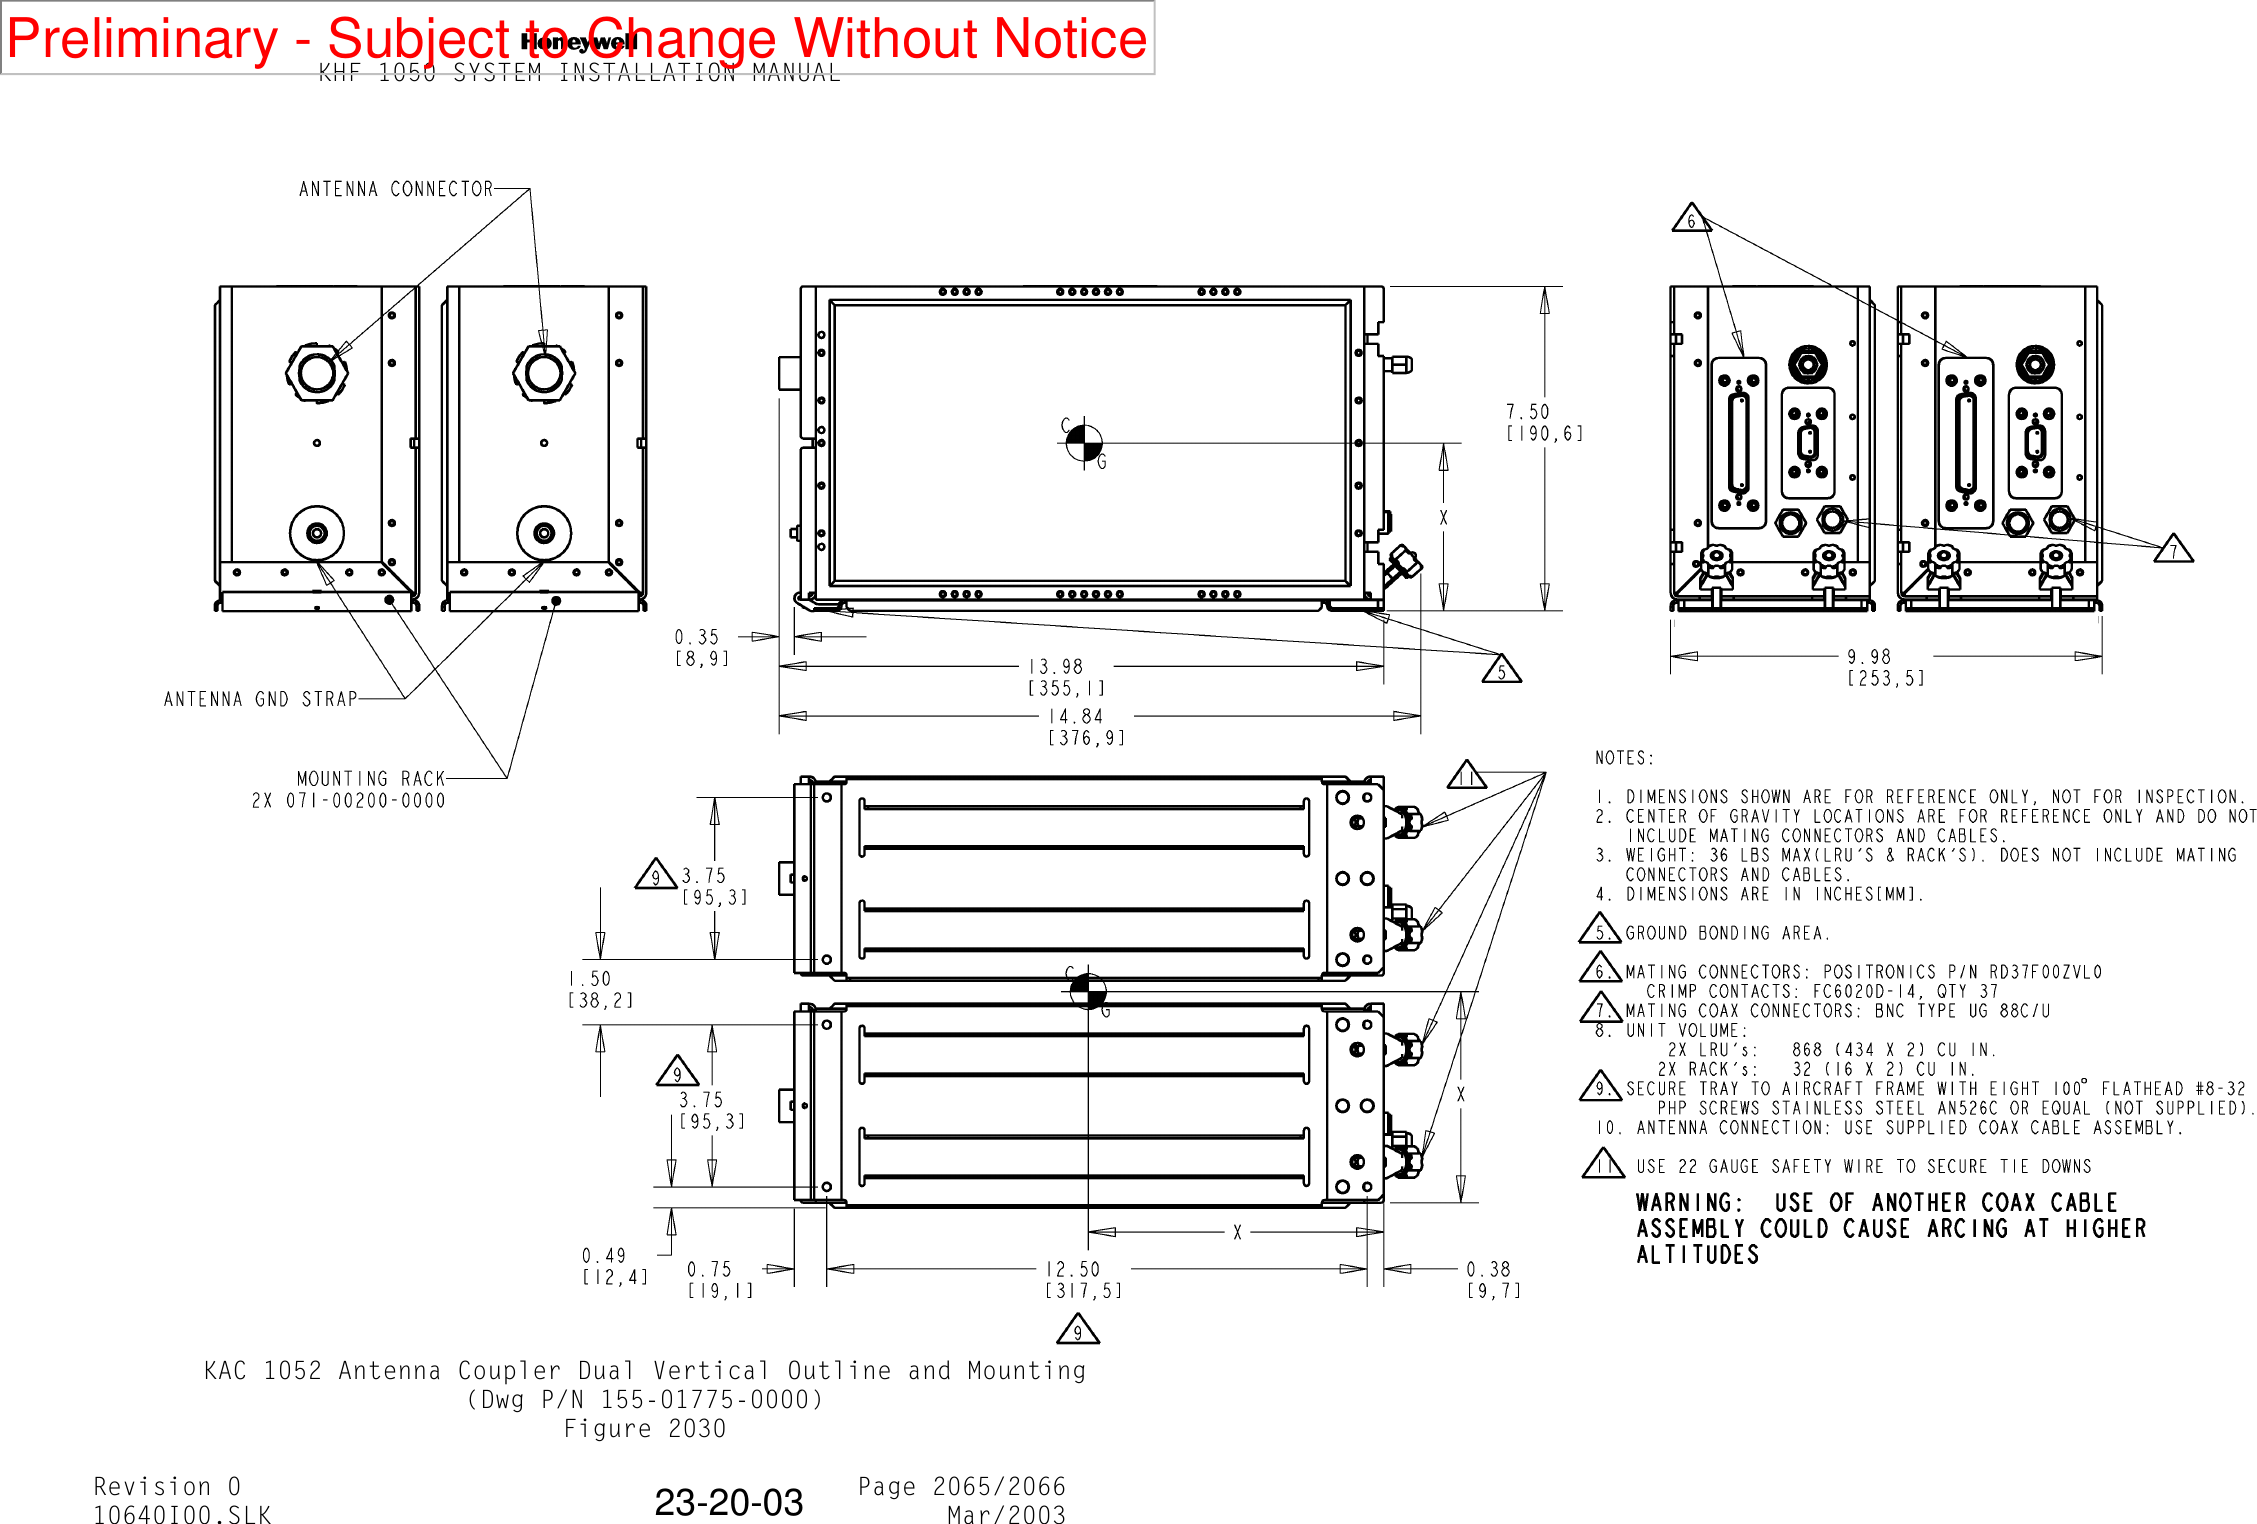 NKHF 1050 SYSTEM INSTALLATION MANUALRevision 0 Page 2065/206610640I00.SLK Mar/200323-20-03KAC 1052 Antenna Coupler Dual Vertical Outline and Mounting(Dwg P/N 155-01775-0000)Figure 2030Preliminary - Subject to Change Without Notice